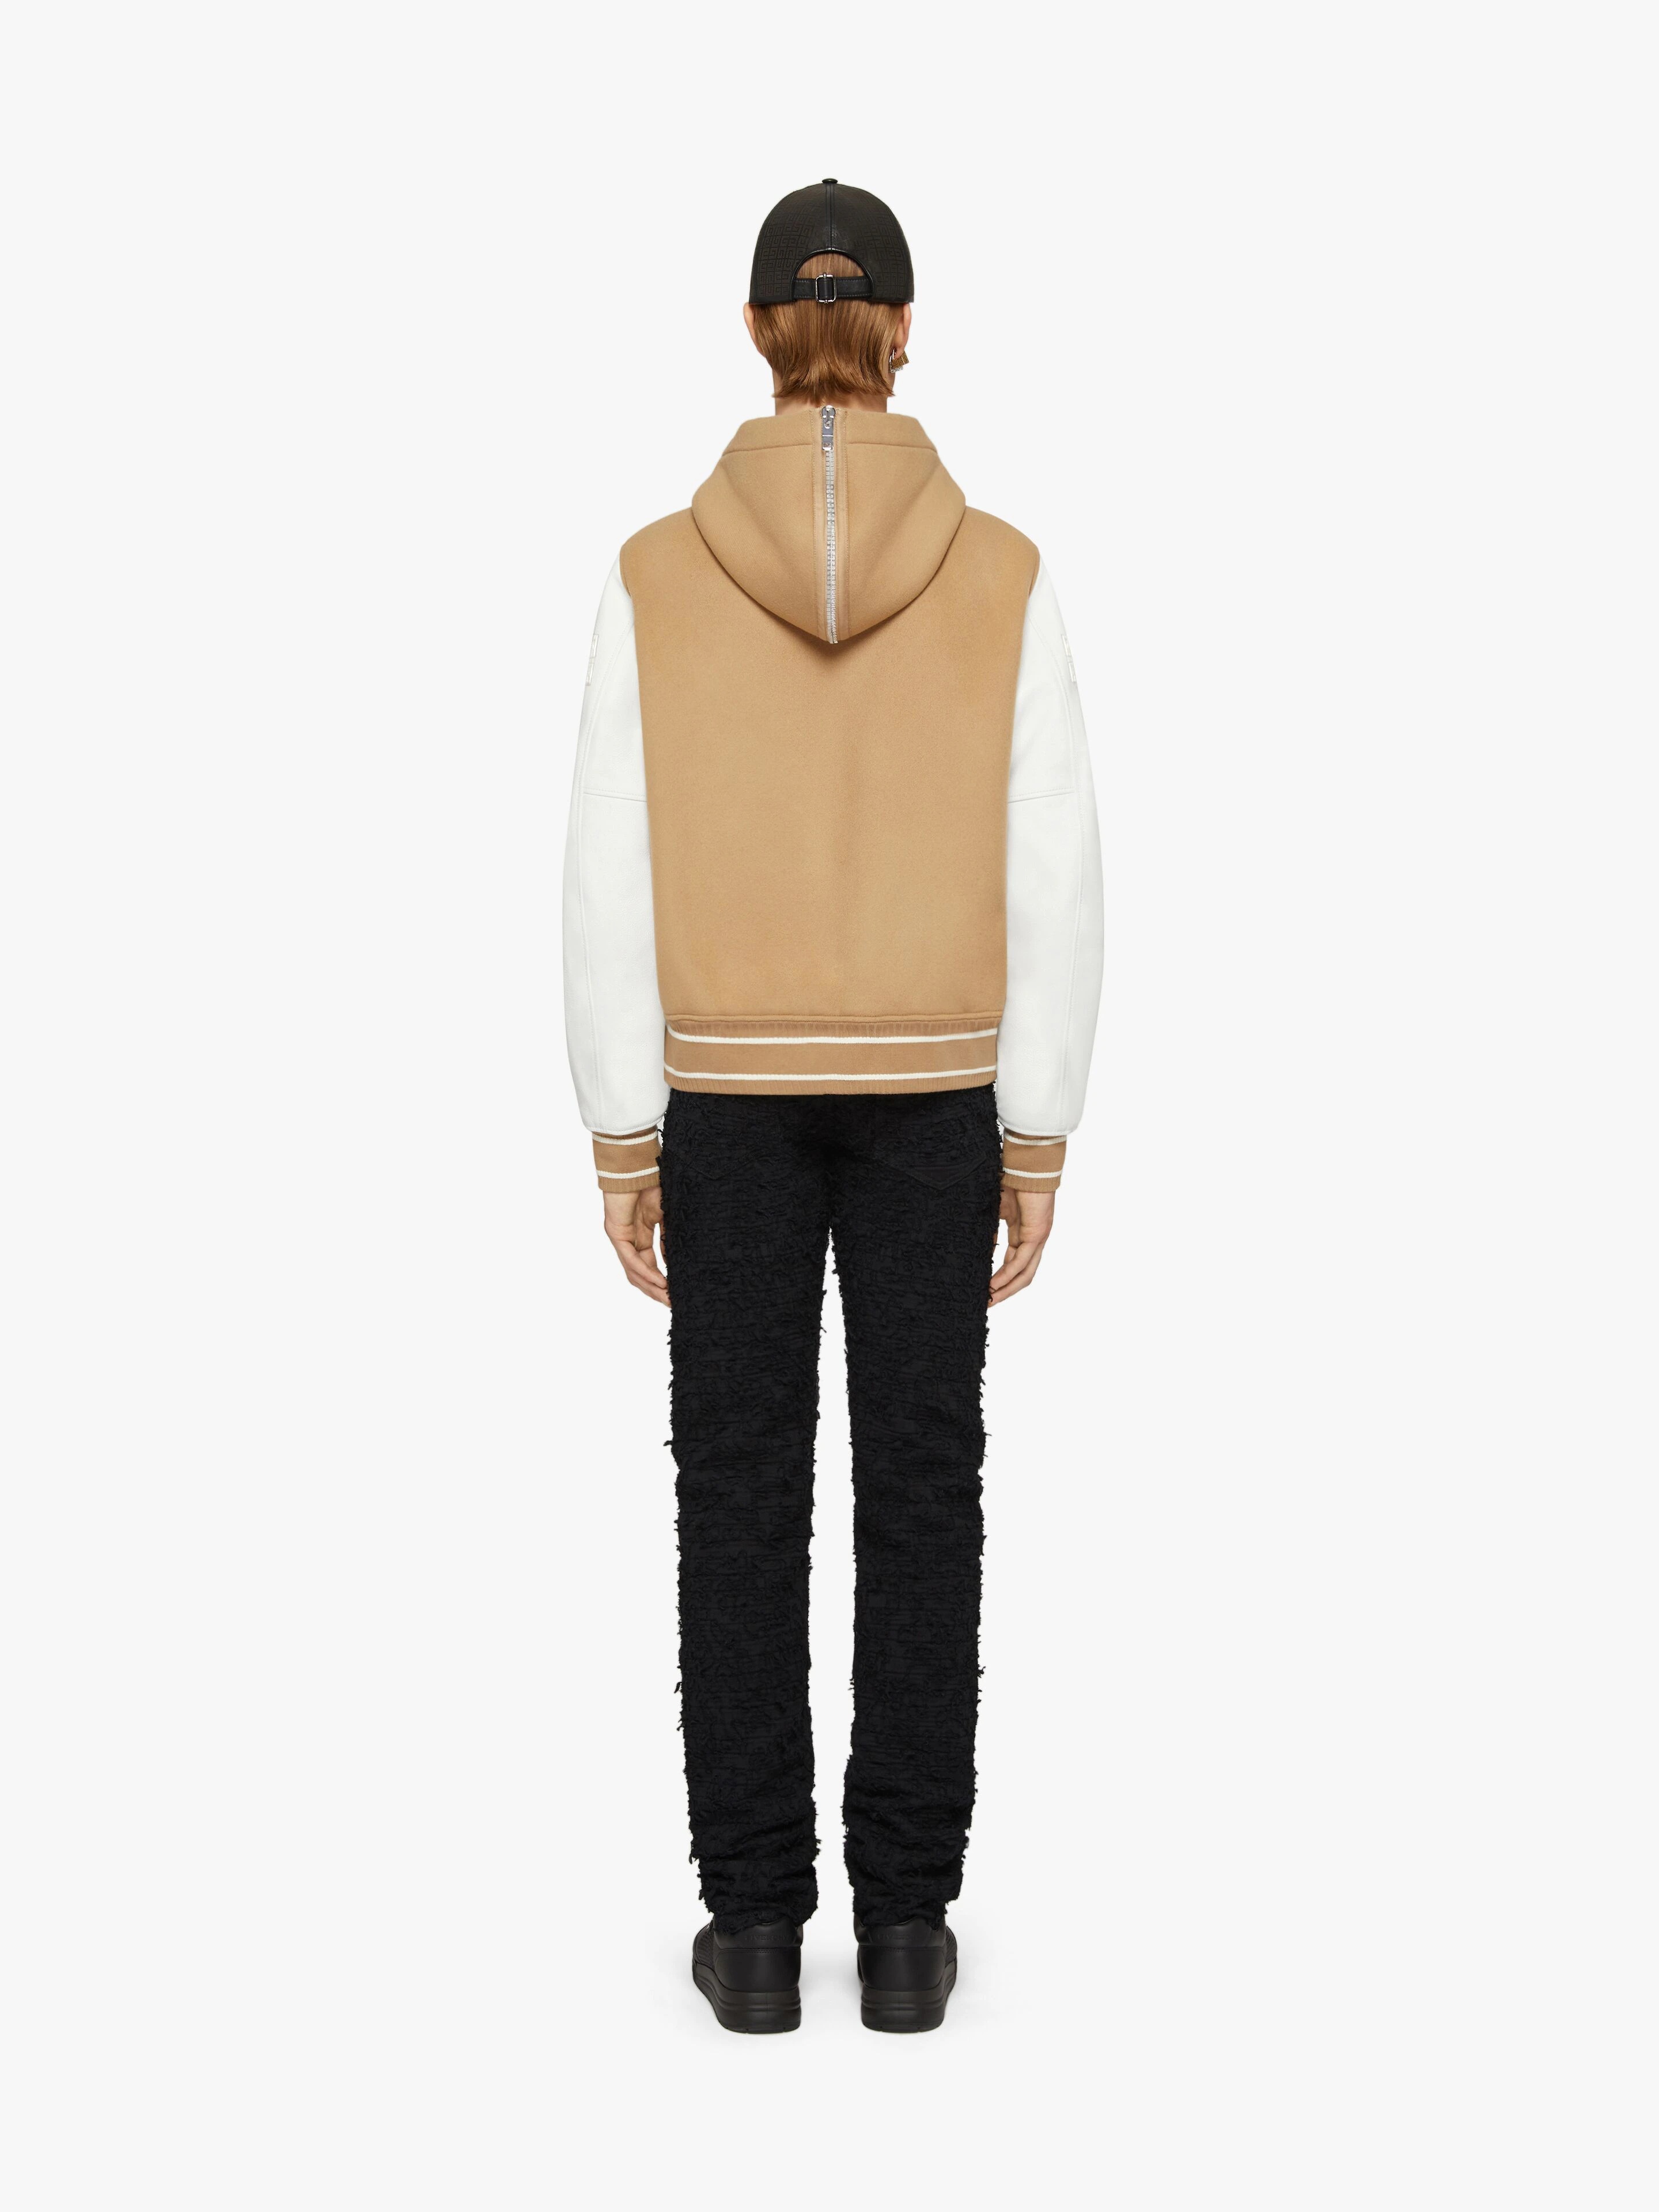 GIVENCHY HOODED VARSITY JACKET IN WOOL AND LEATHER - 4